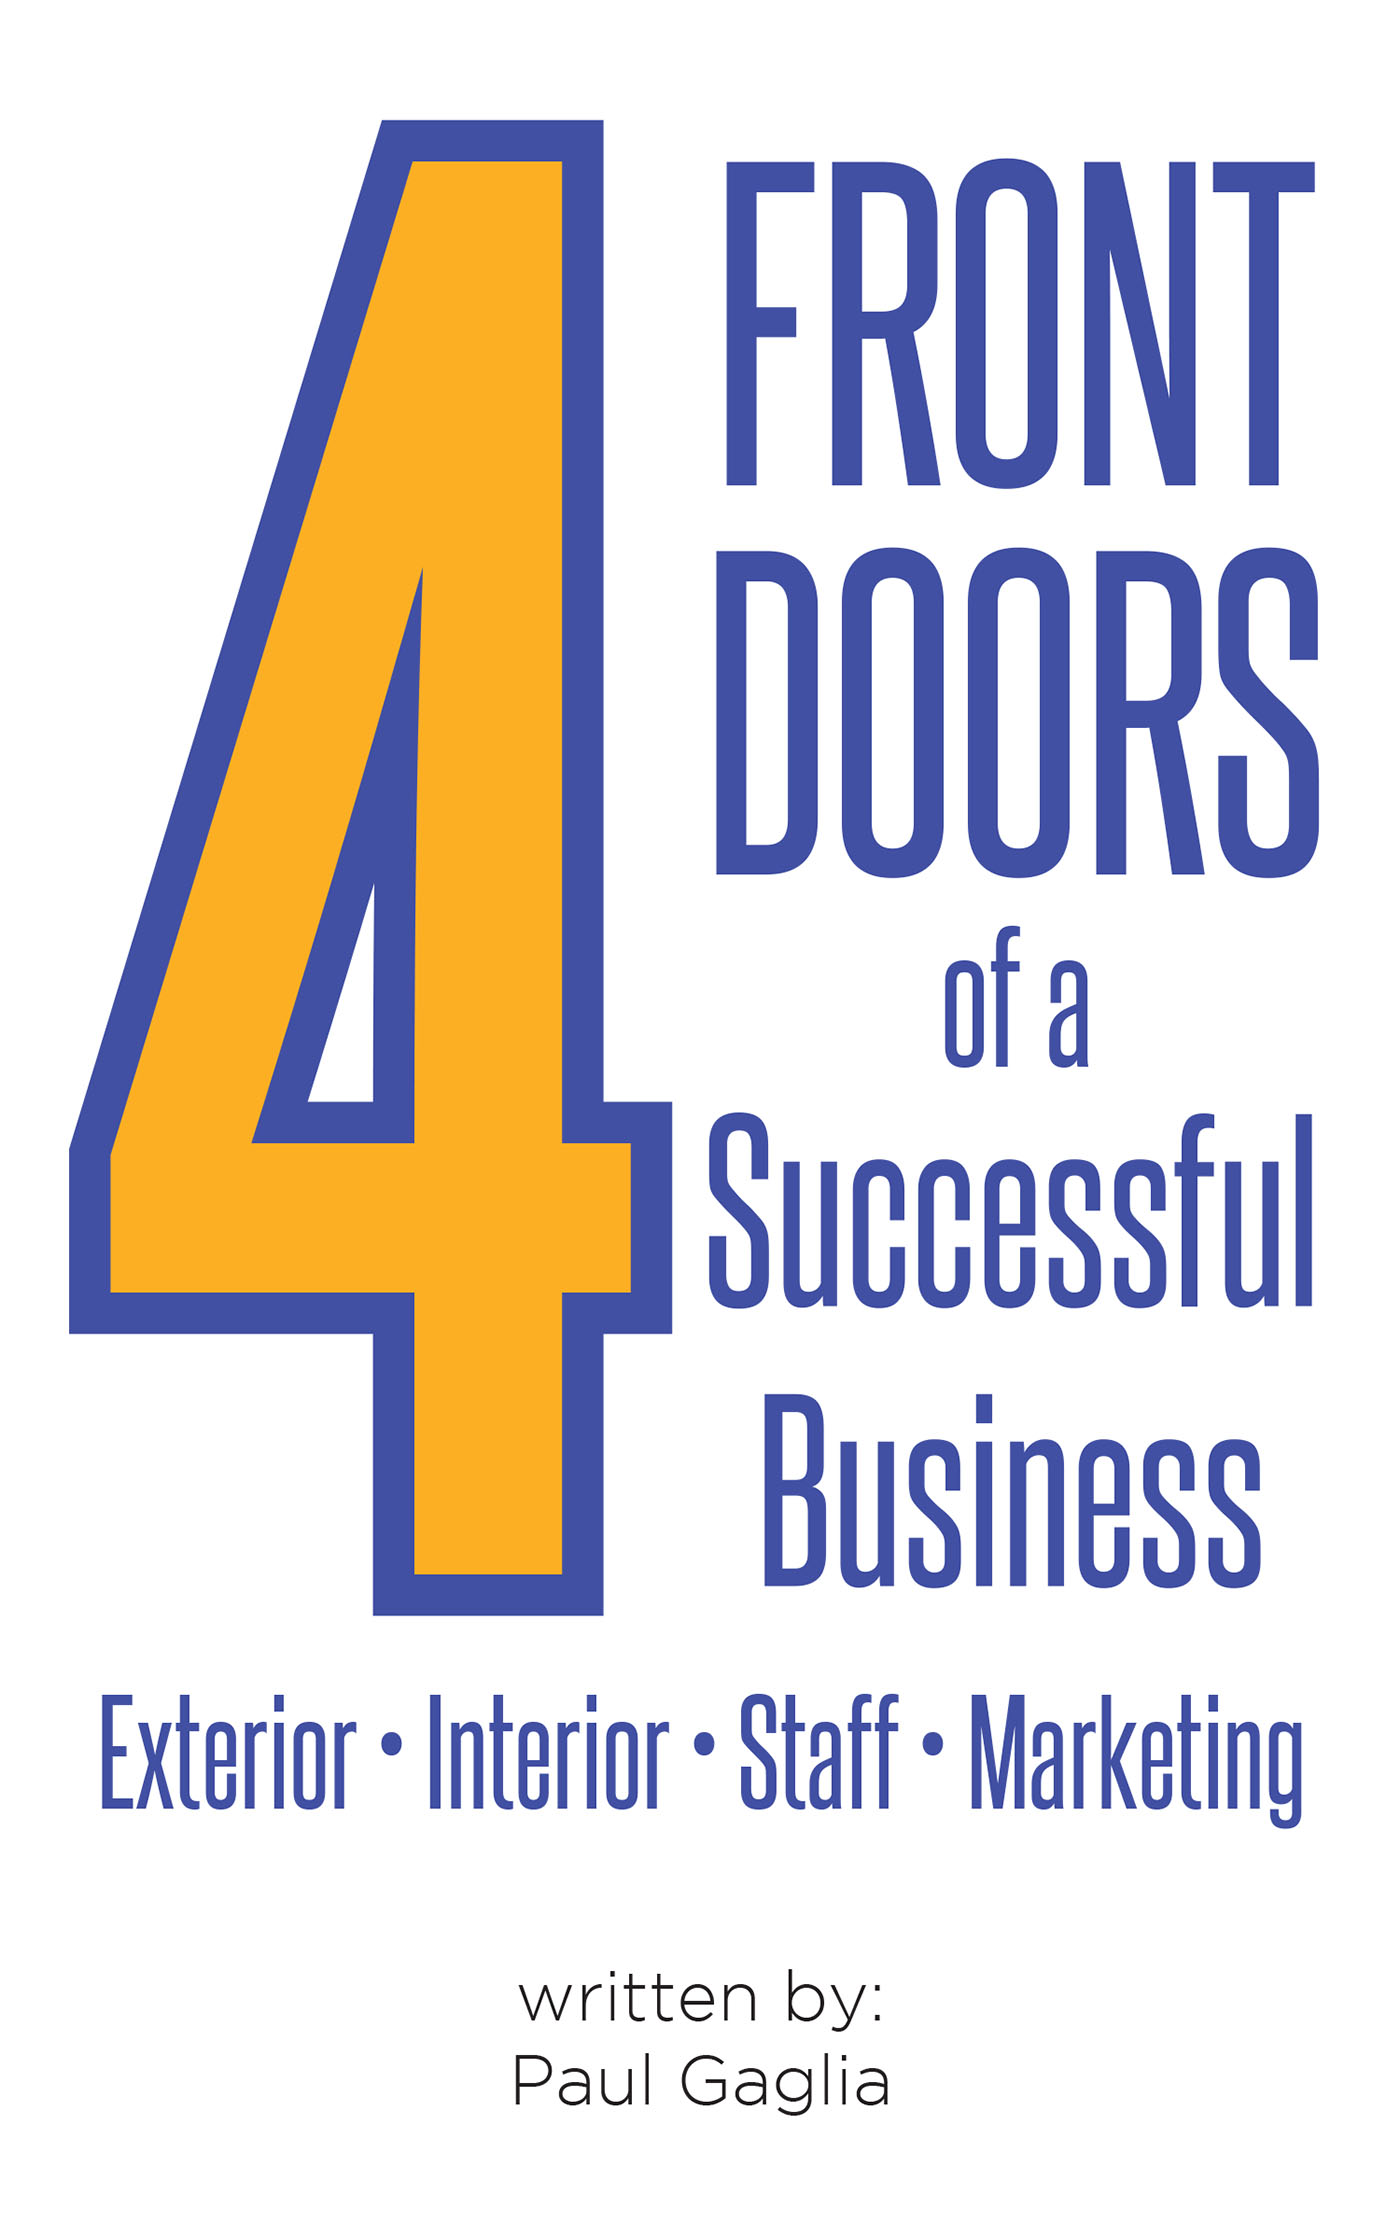 Author Paul Gaglia’s New Book, "4 Front Doors of a Successful Business," Offers Essential and Endlessly Invaluable Guidance for All Entrepreneurs